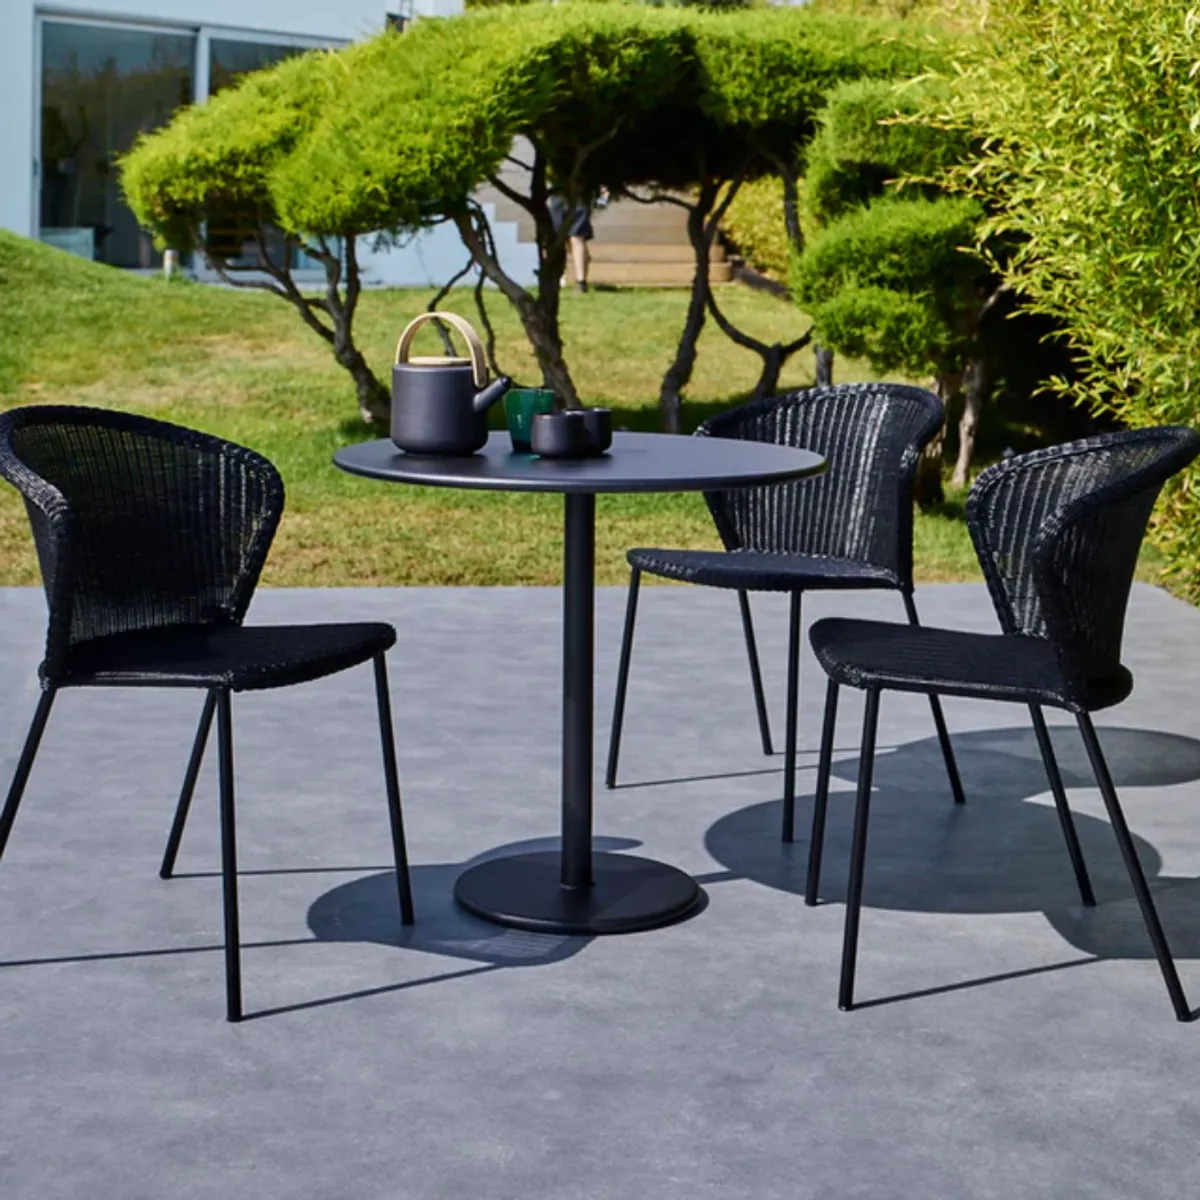 Tropez stacking chair 5